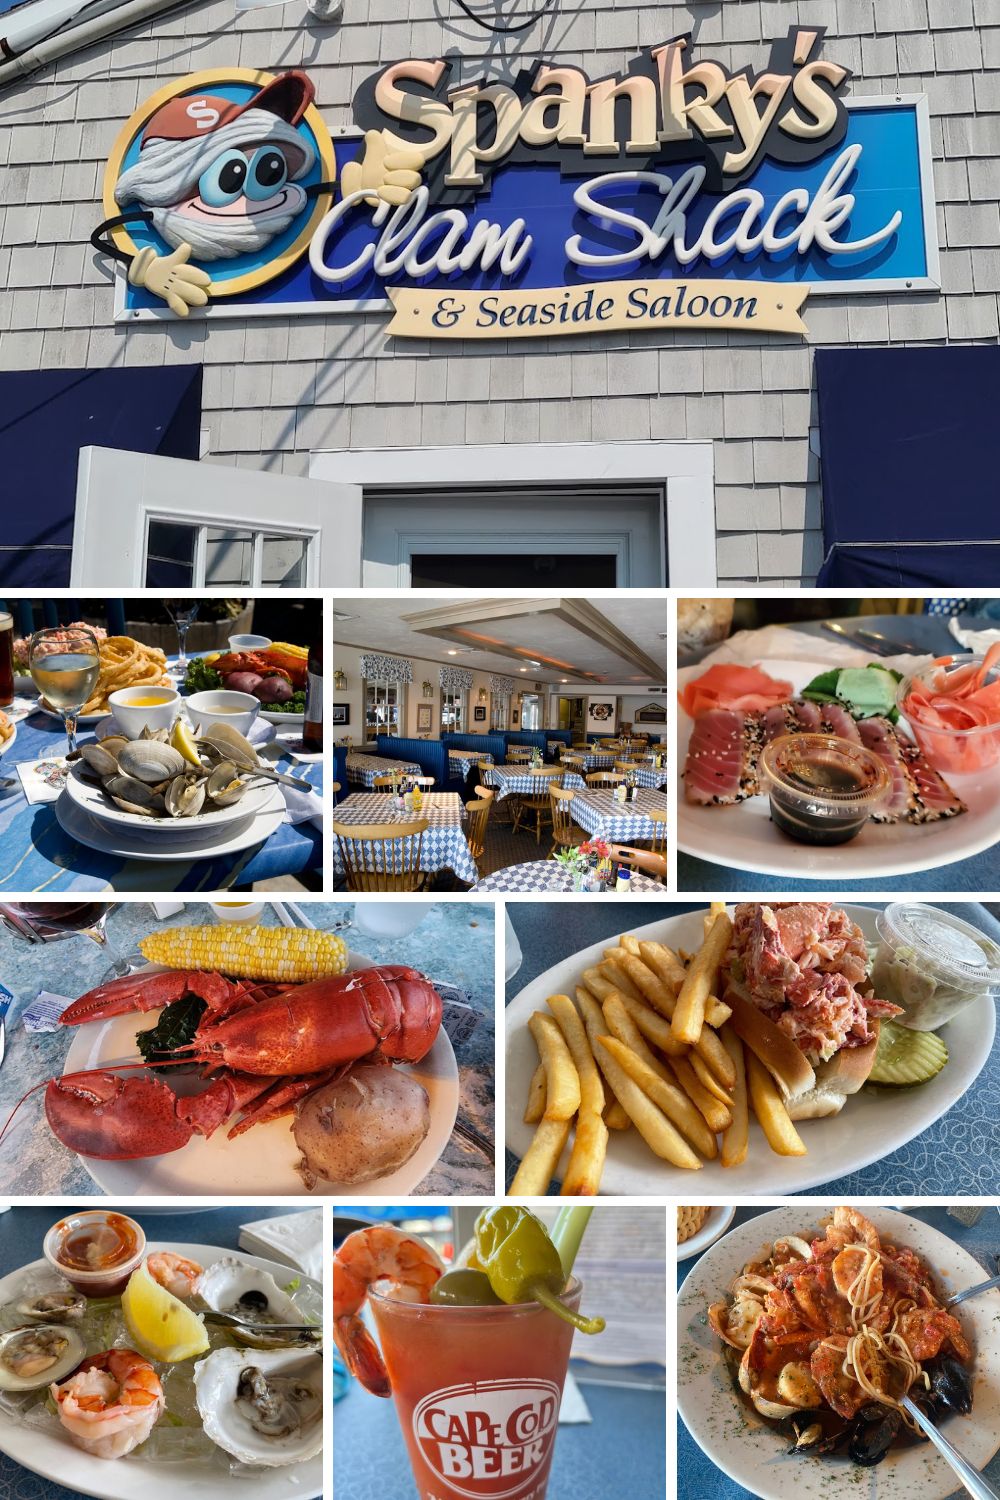 Spankys Clam Shack and Seaside Saloon